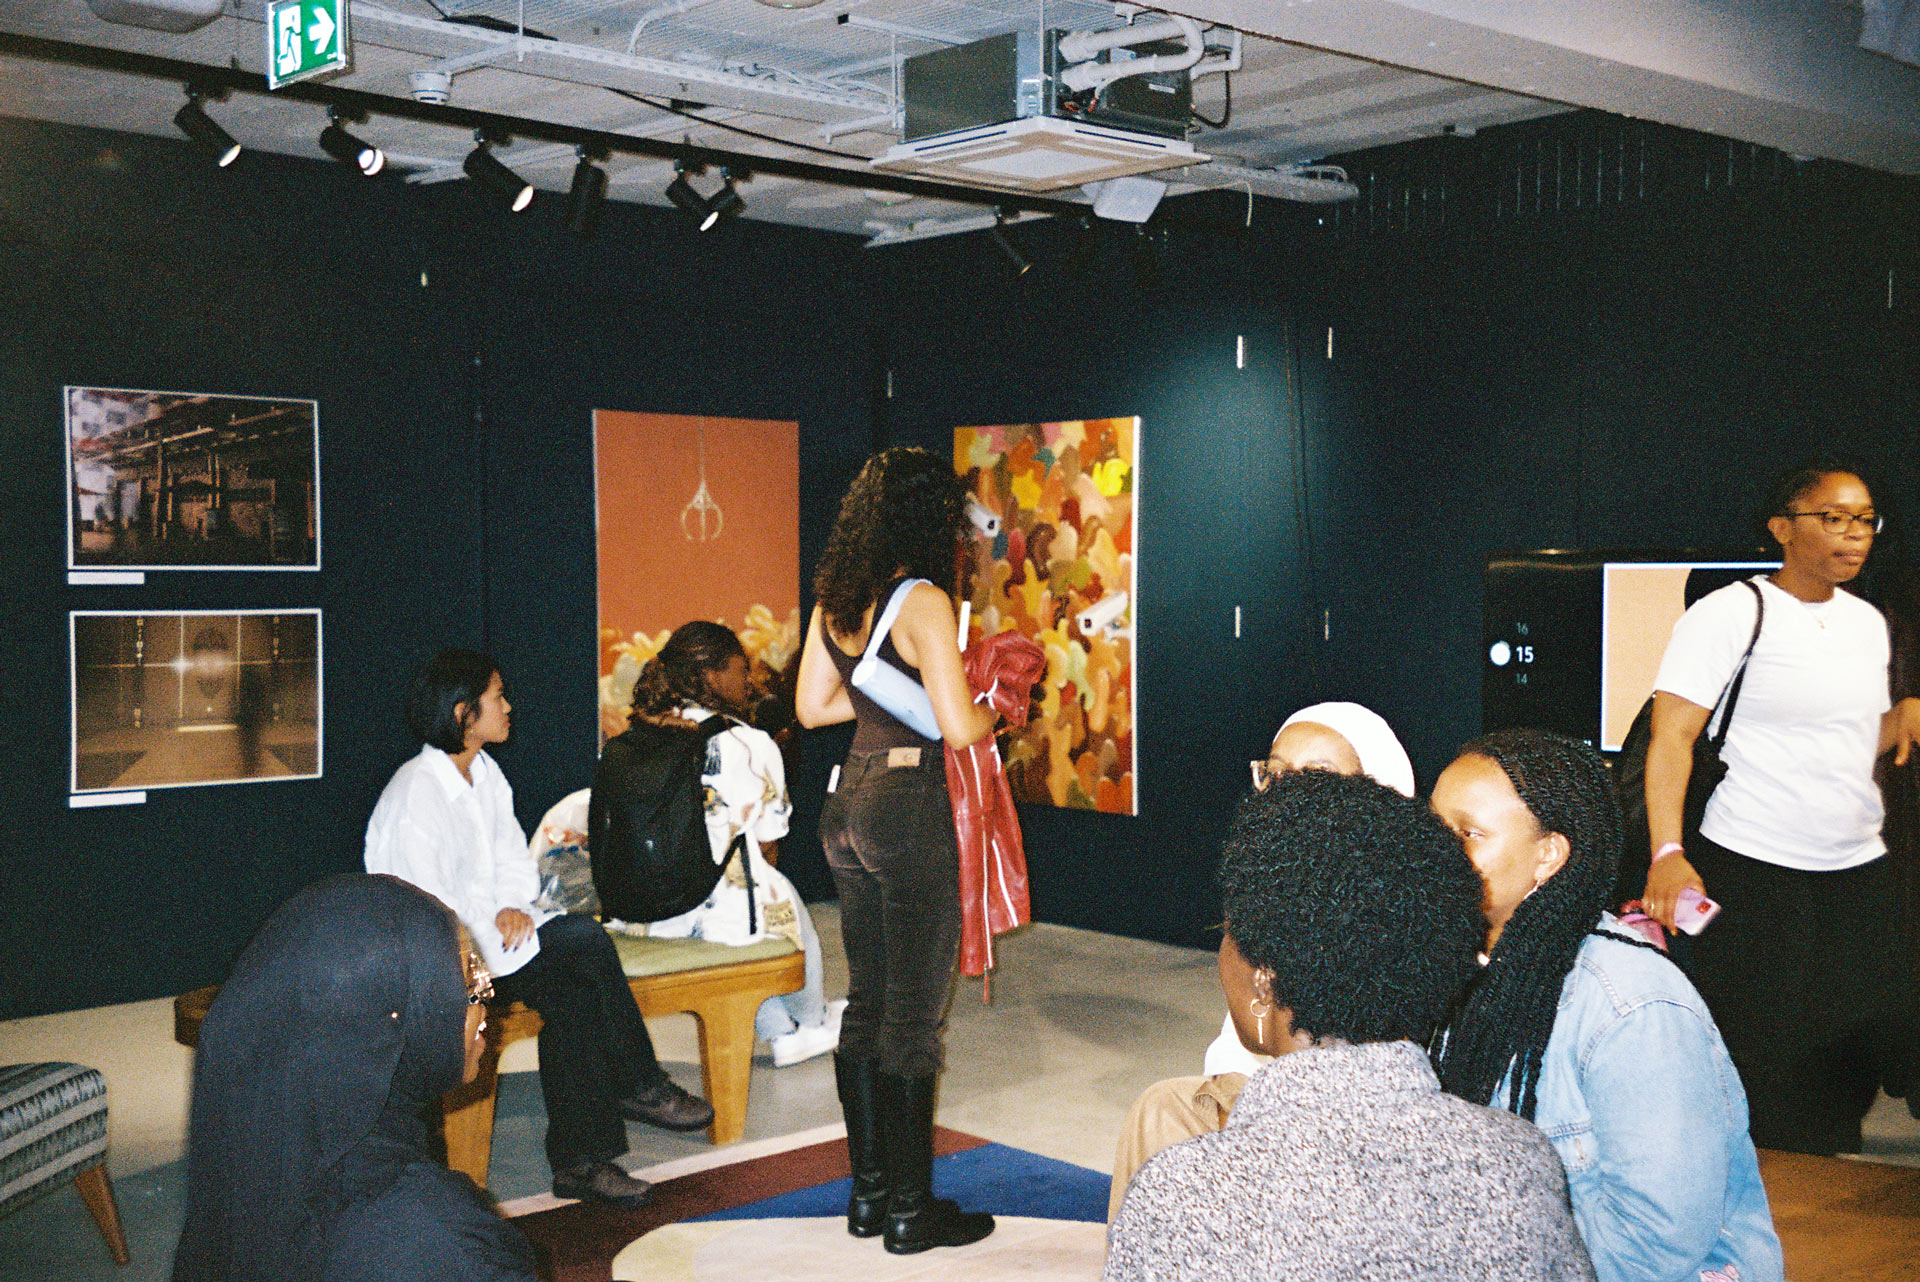 Group of young people, sitting and standing together in an art gallery 